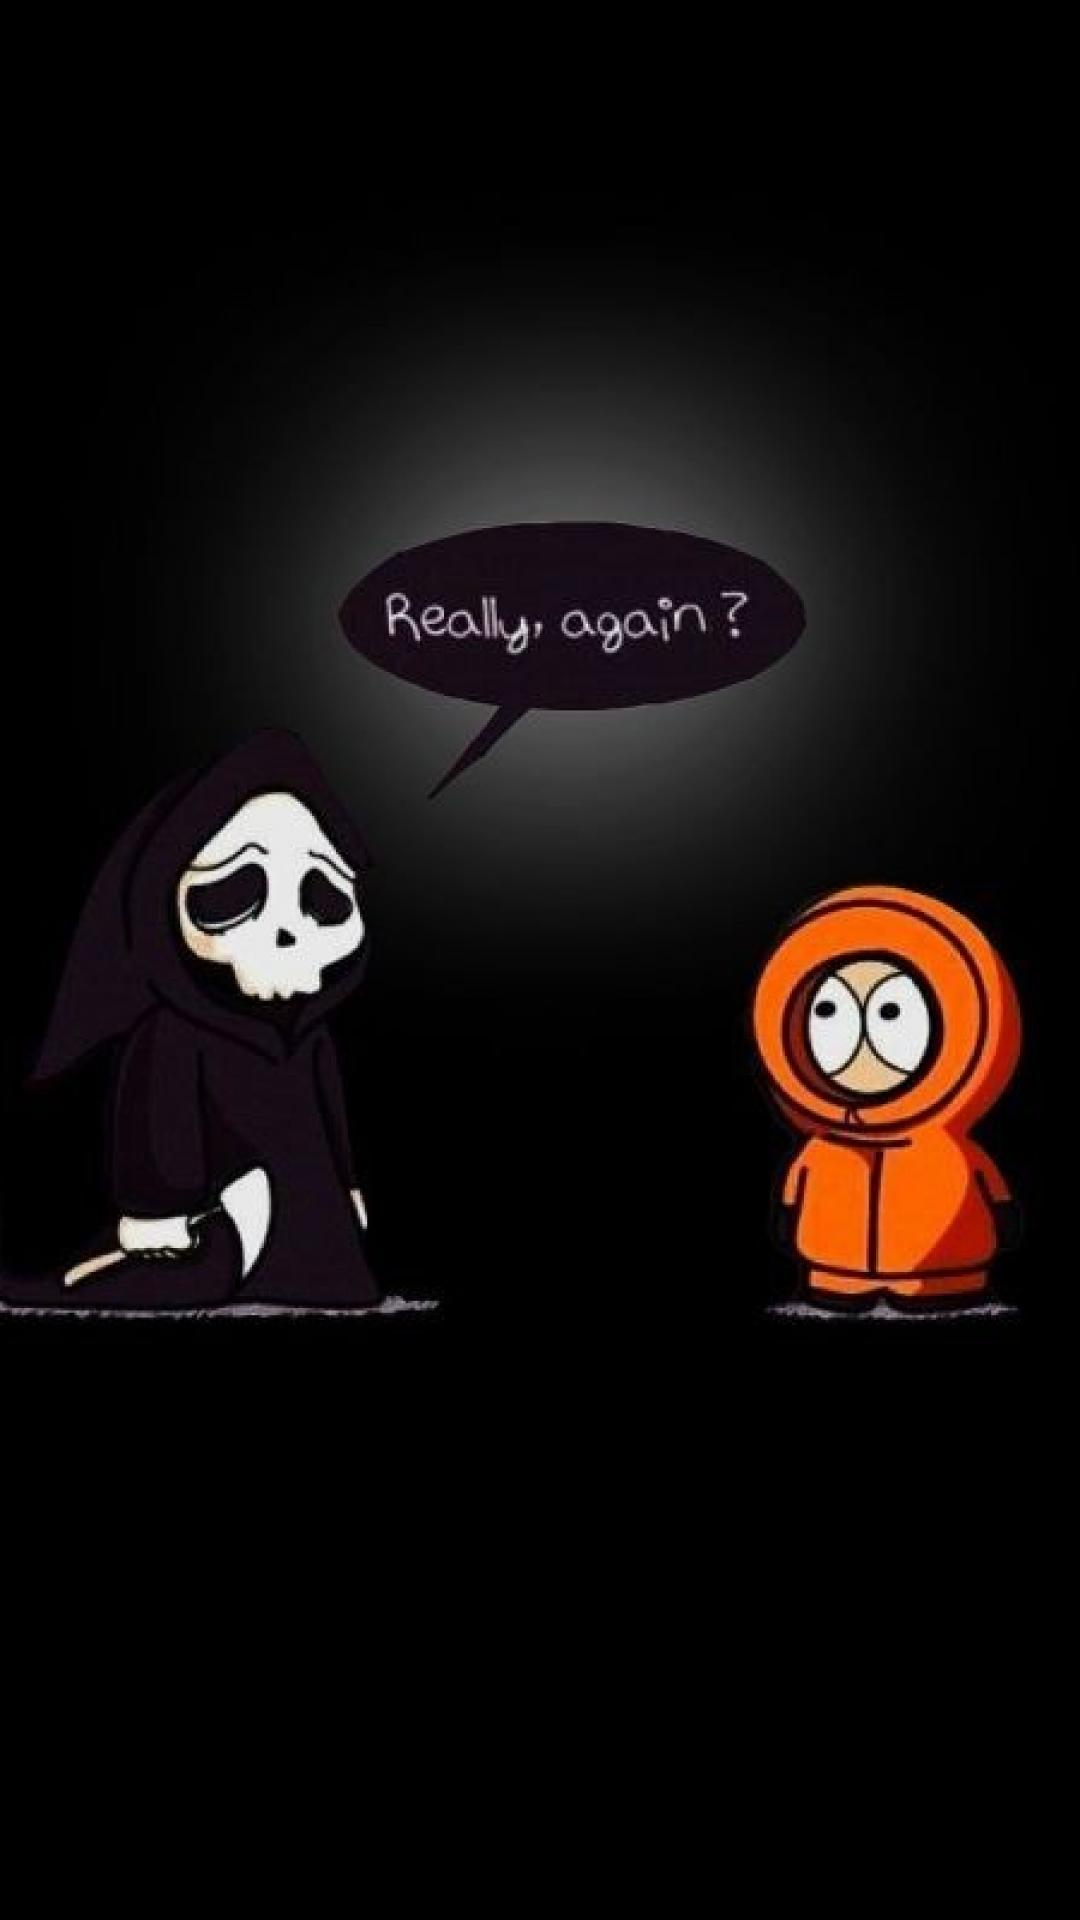 South Park Funny Kenny Mccormick Clean Wallpaper